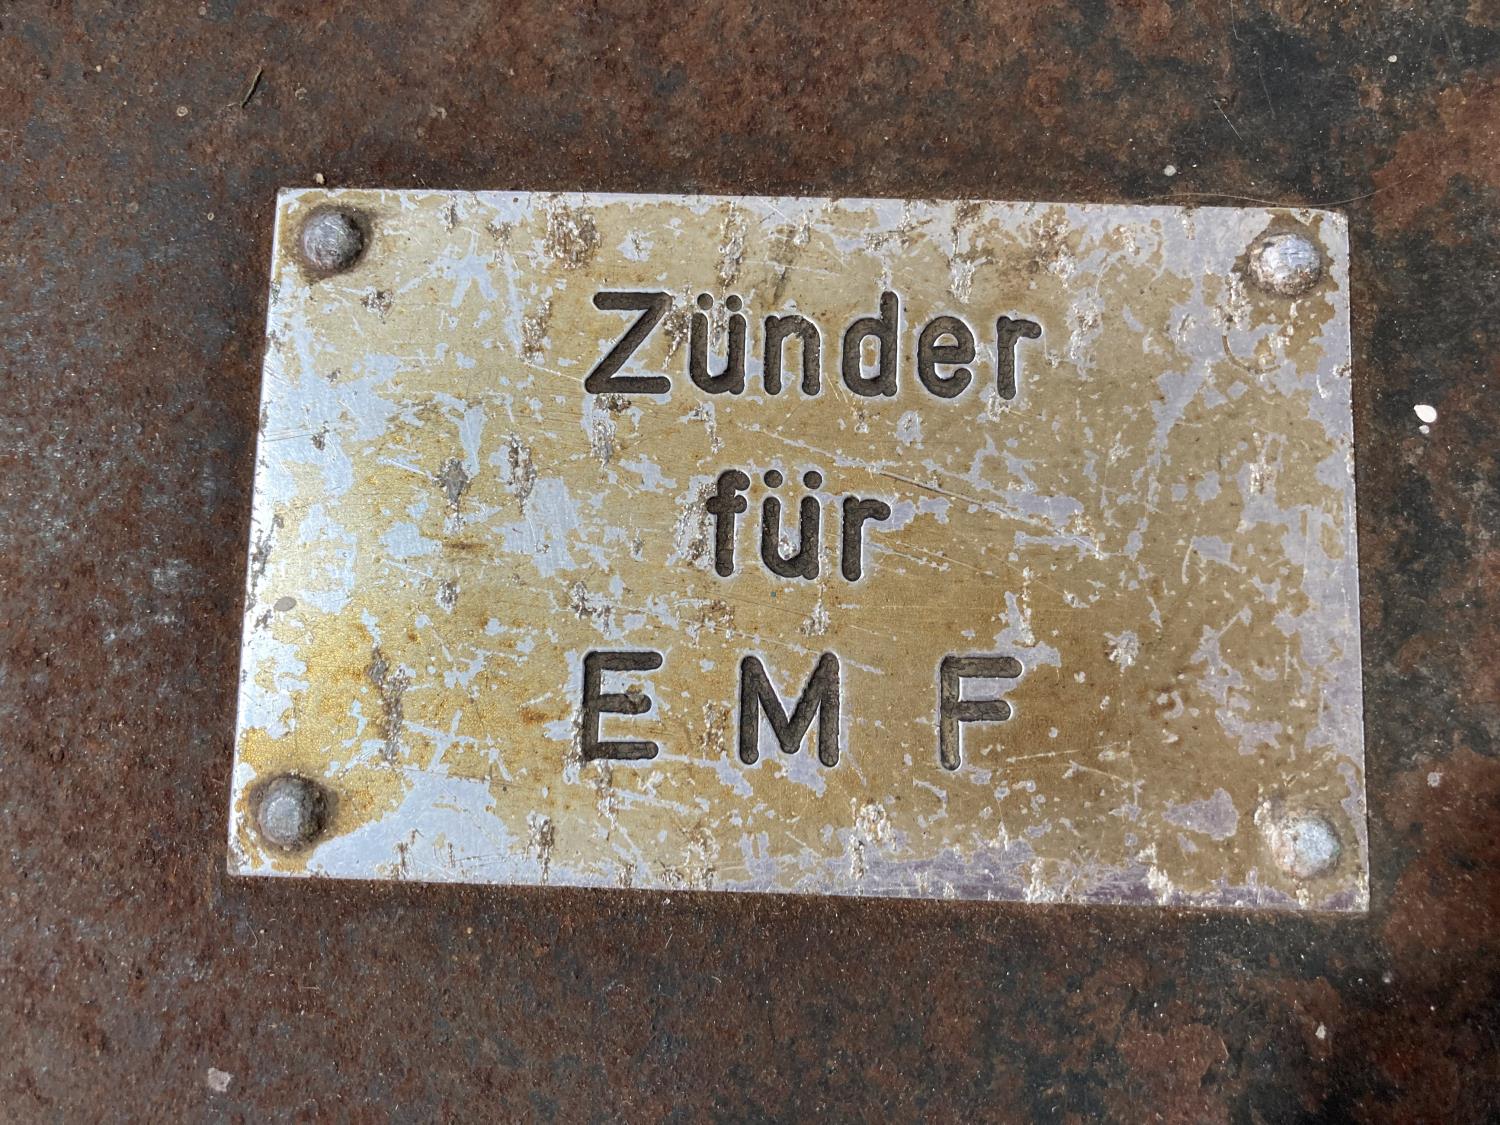 A German WW1 period metal ammunition box, thought to be for hand-grenades, labelled ZUNDER FUR EMF